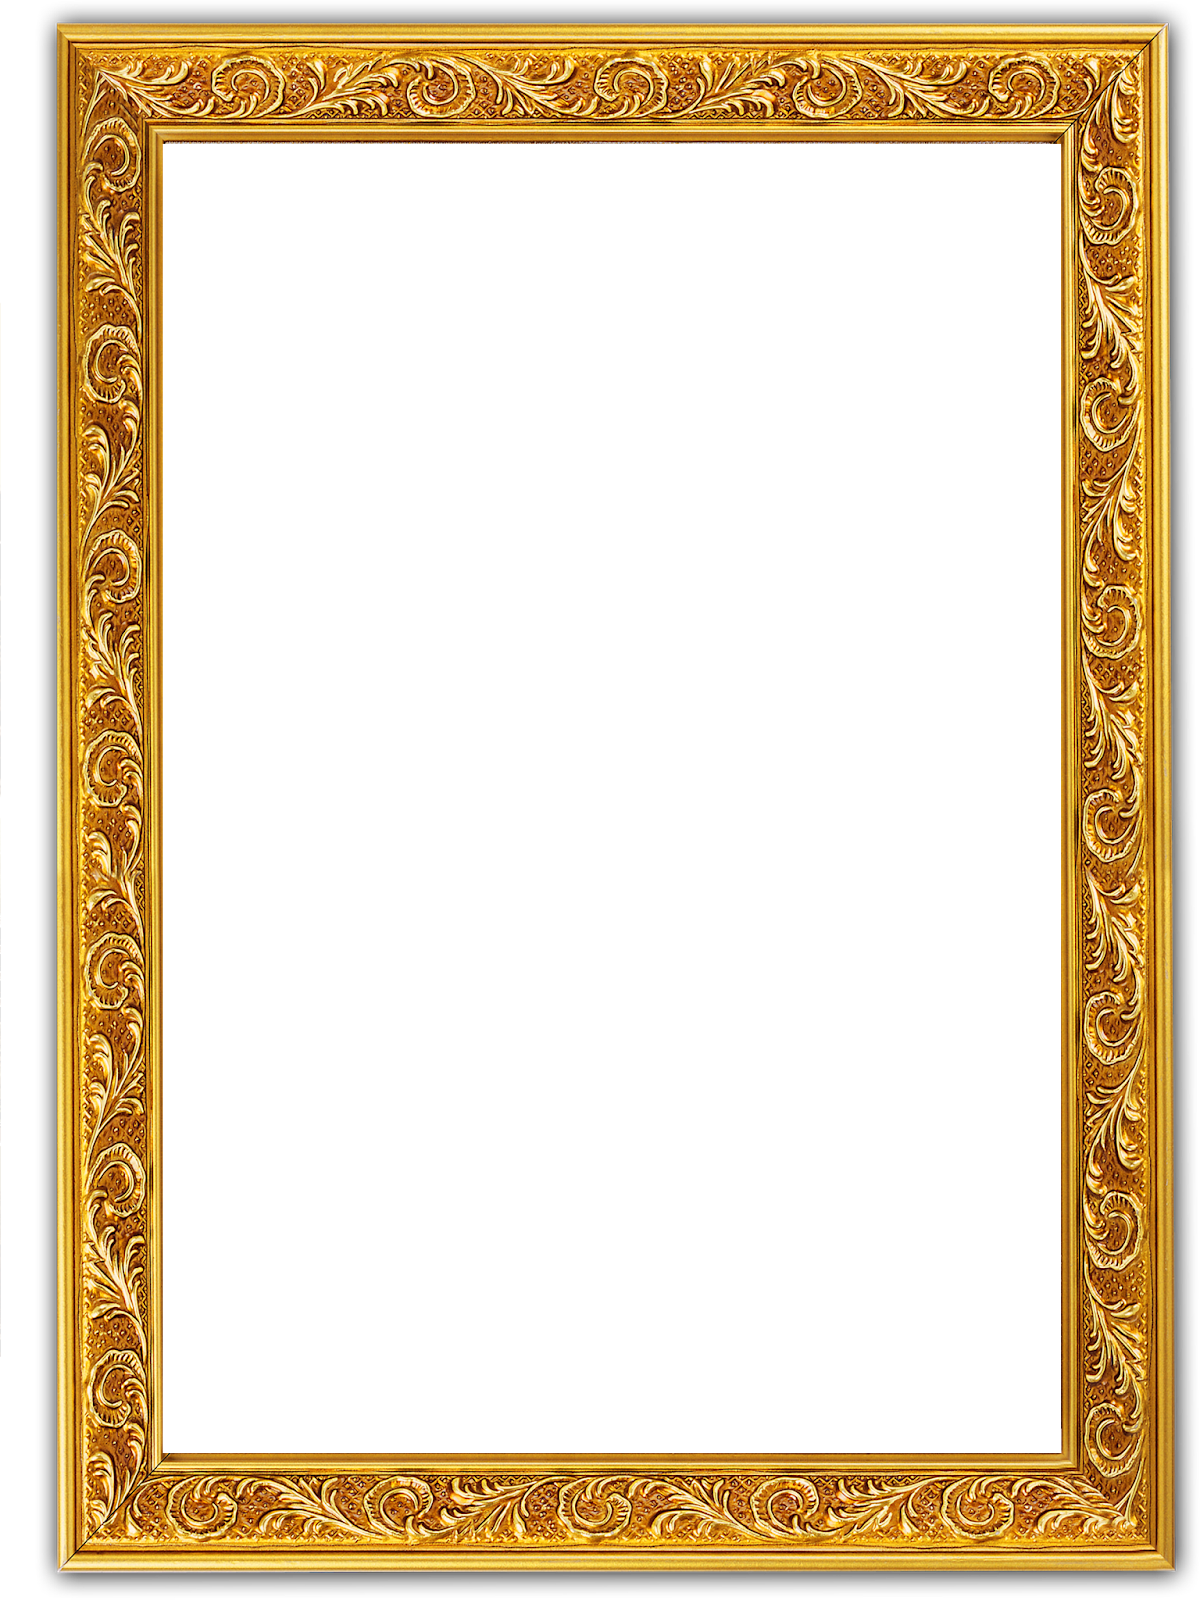 Picture Frame - Rustic Picture Frames - 13-229 : This can contribute as